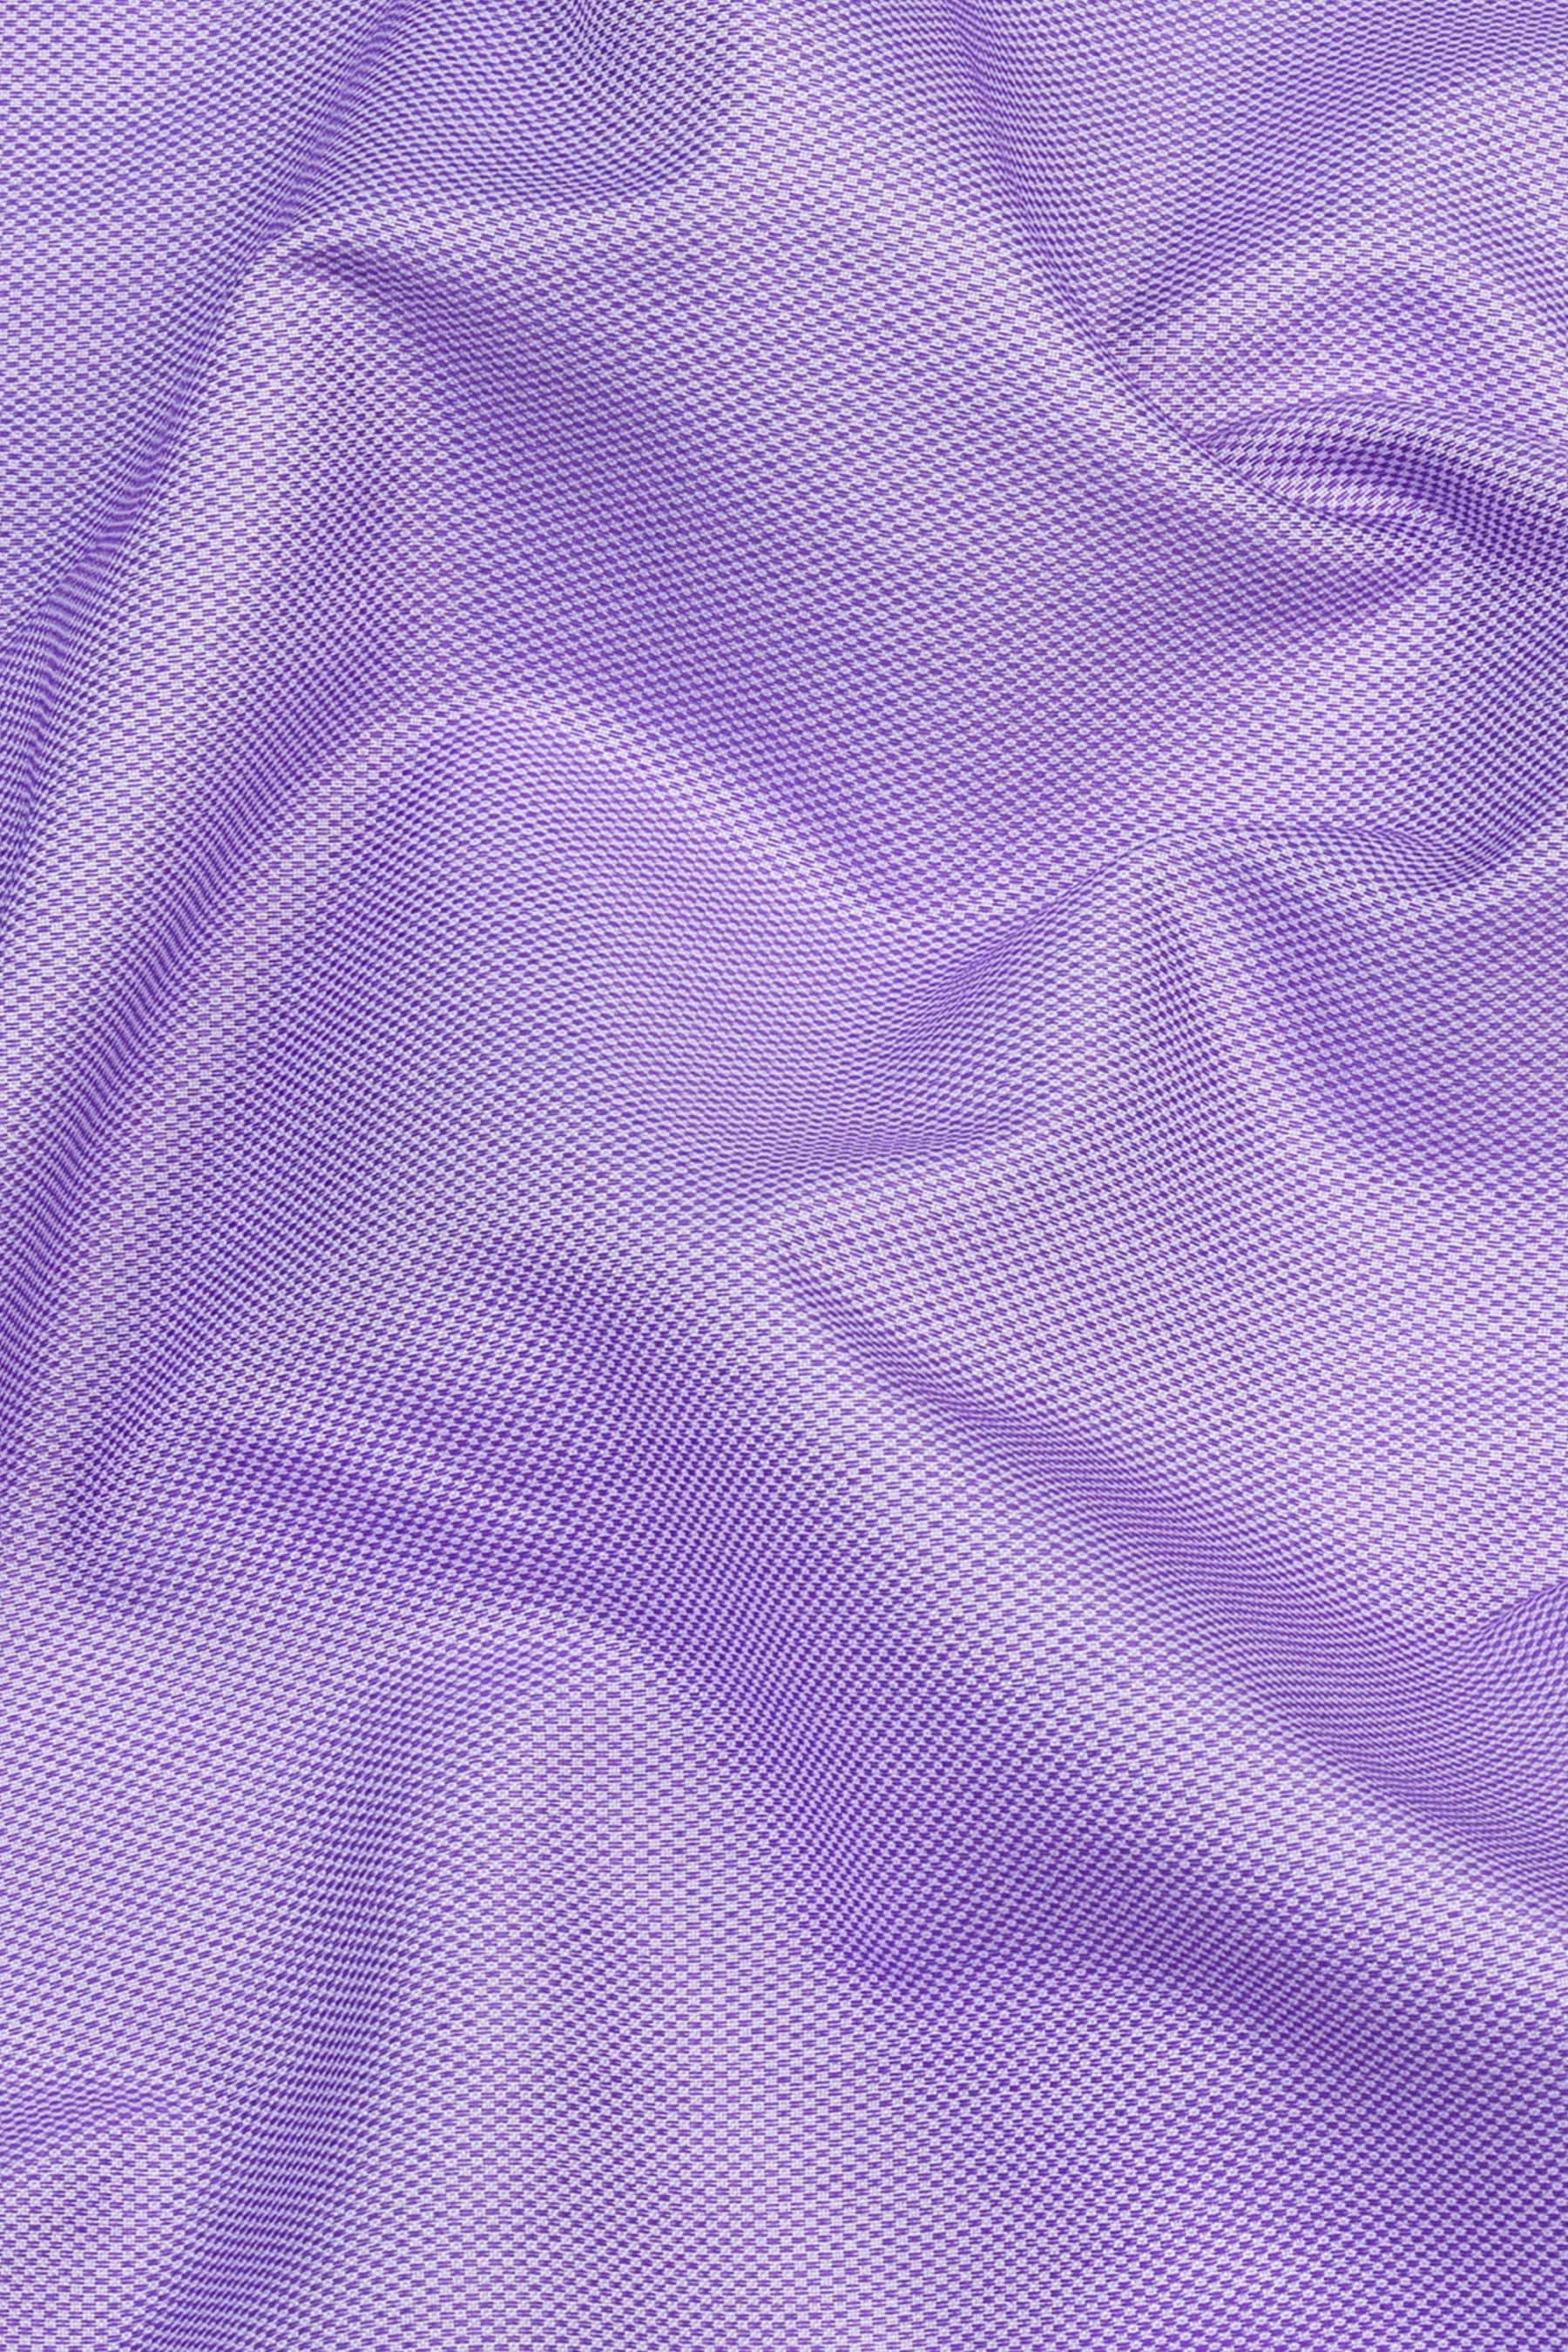 French violet dobby texture shirt